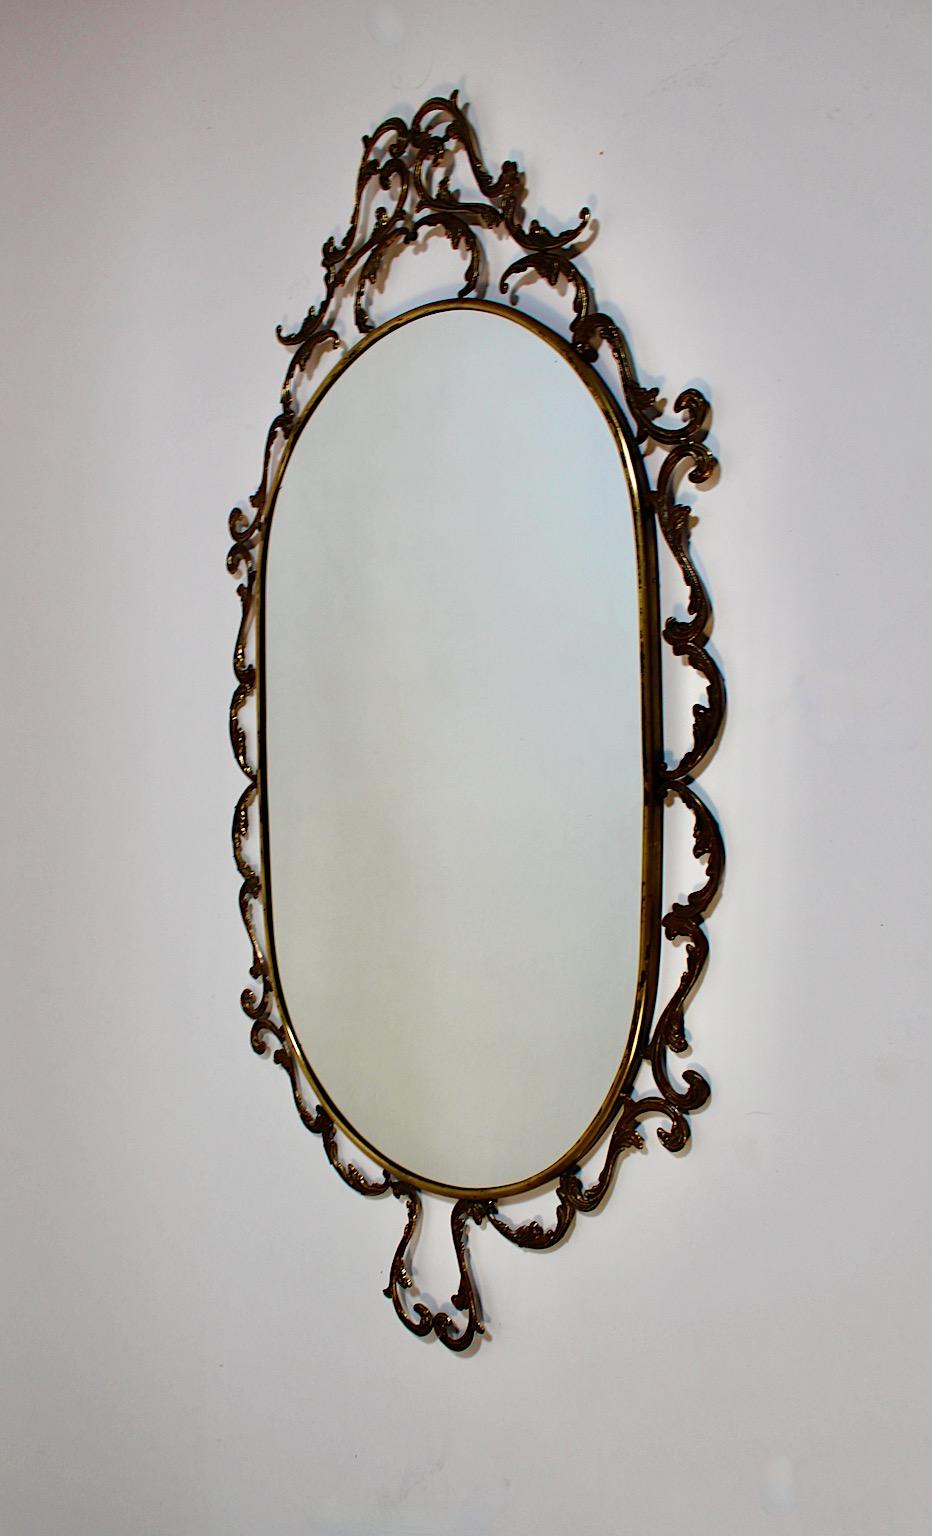 Baroque Revival Style Vintage Oval Wall Mirror Brass 1960s Italy For Sale 3